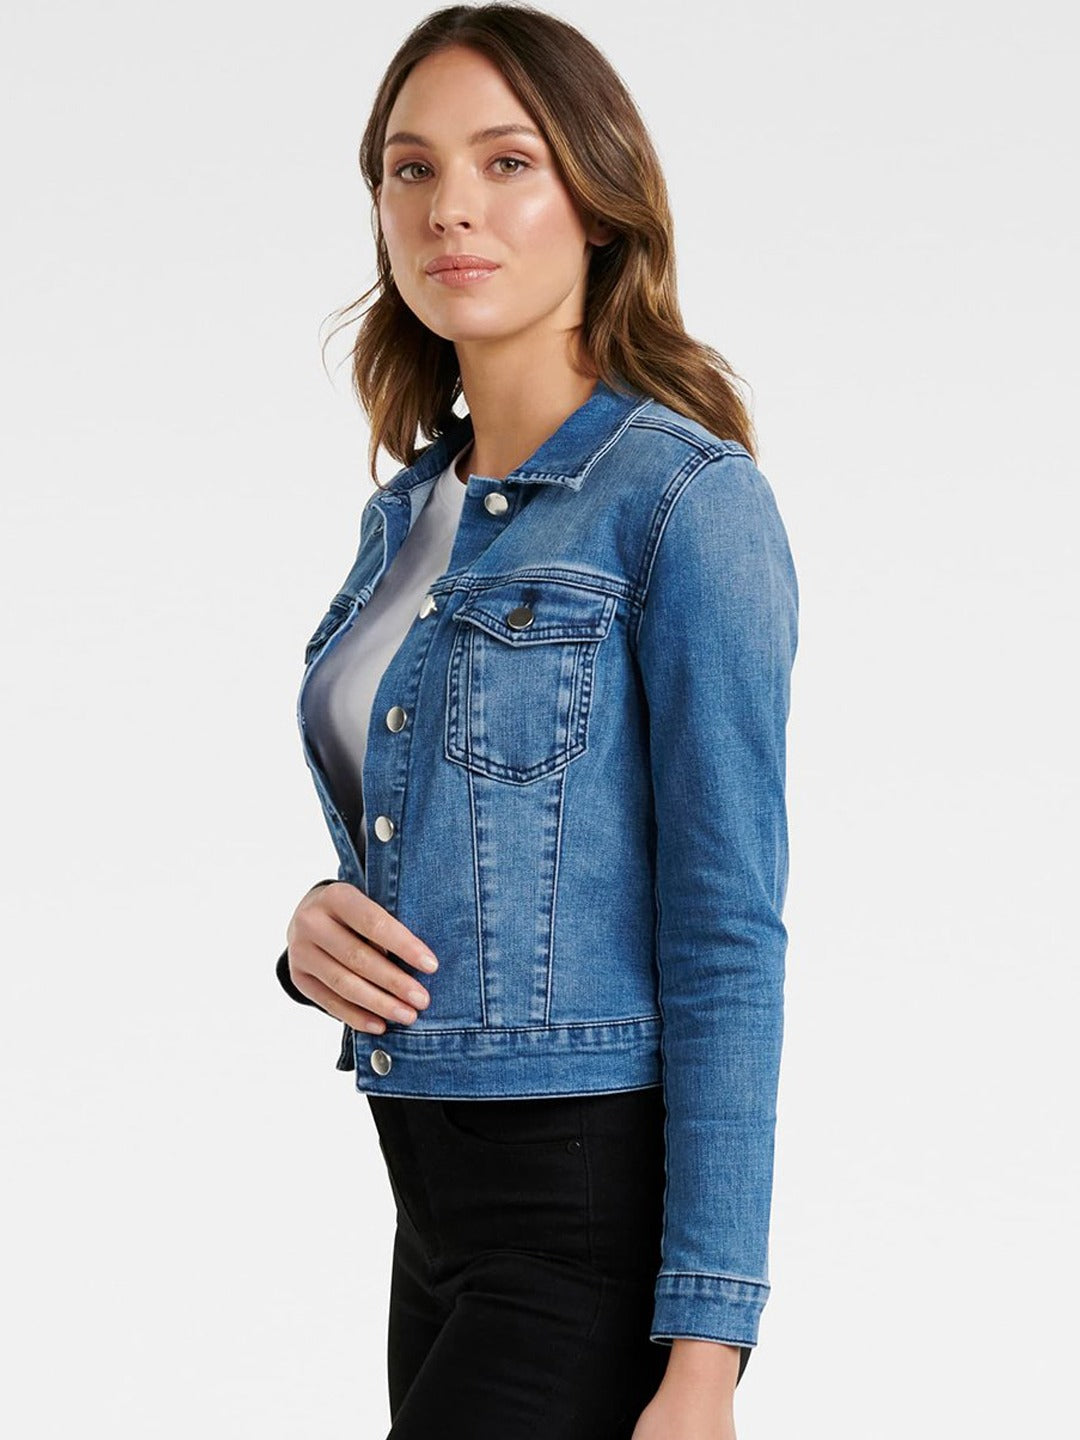 Blue denim jacket with button closures, worn by a young woman with brunette hair against a plain background.